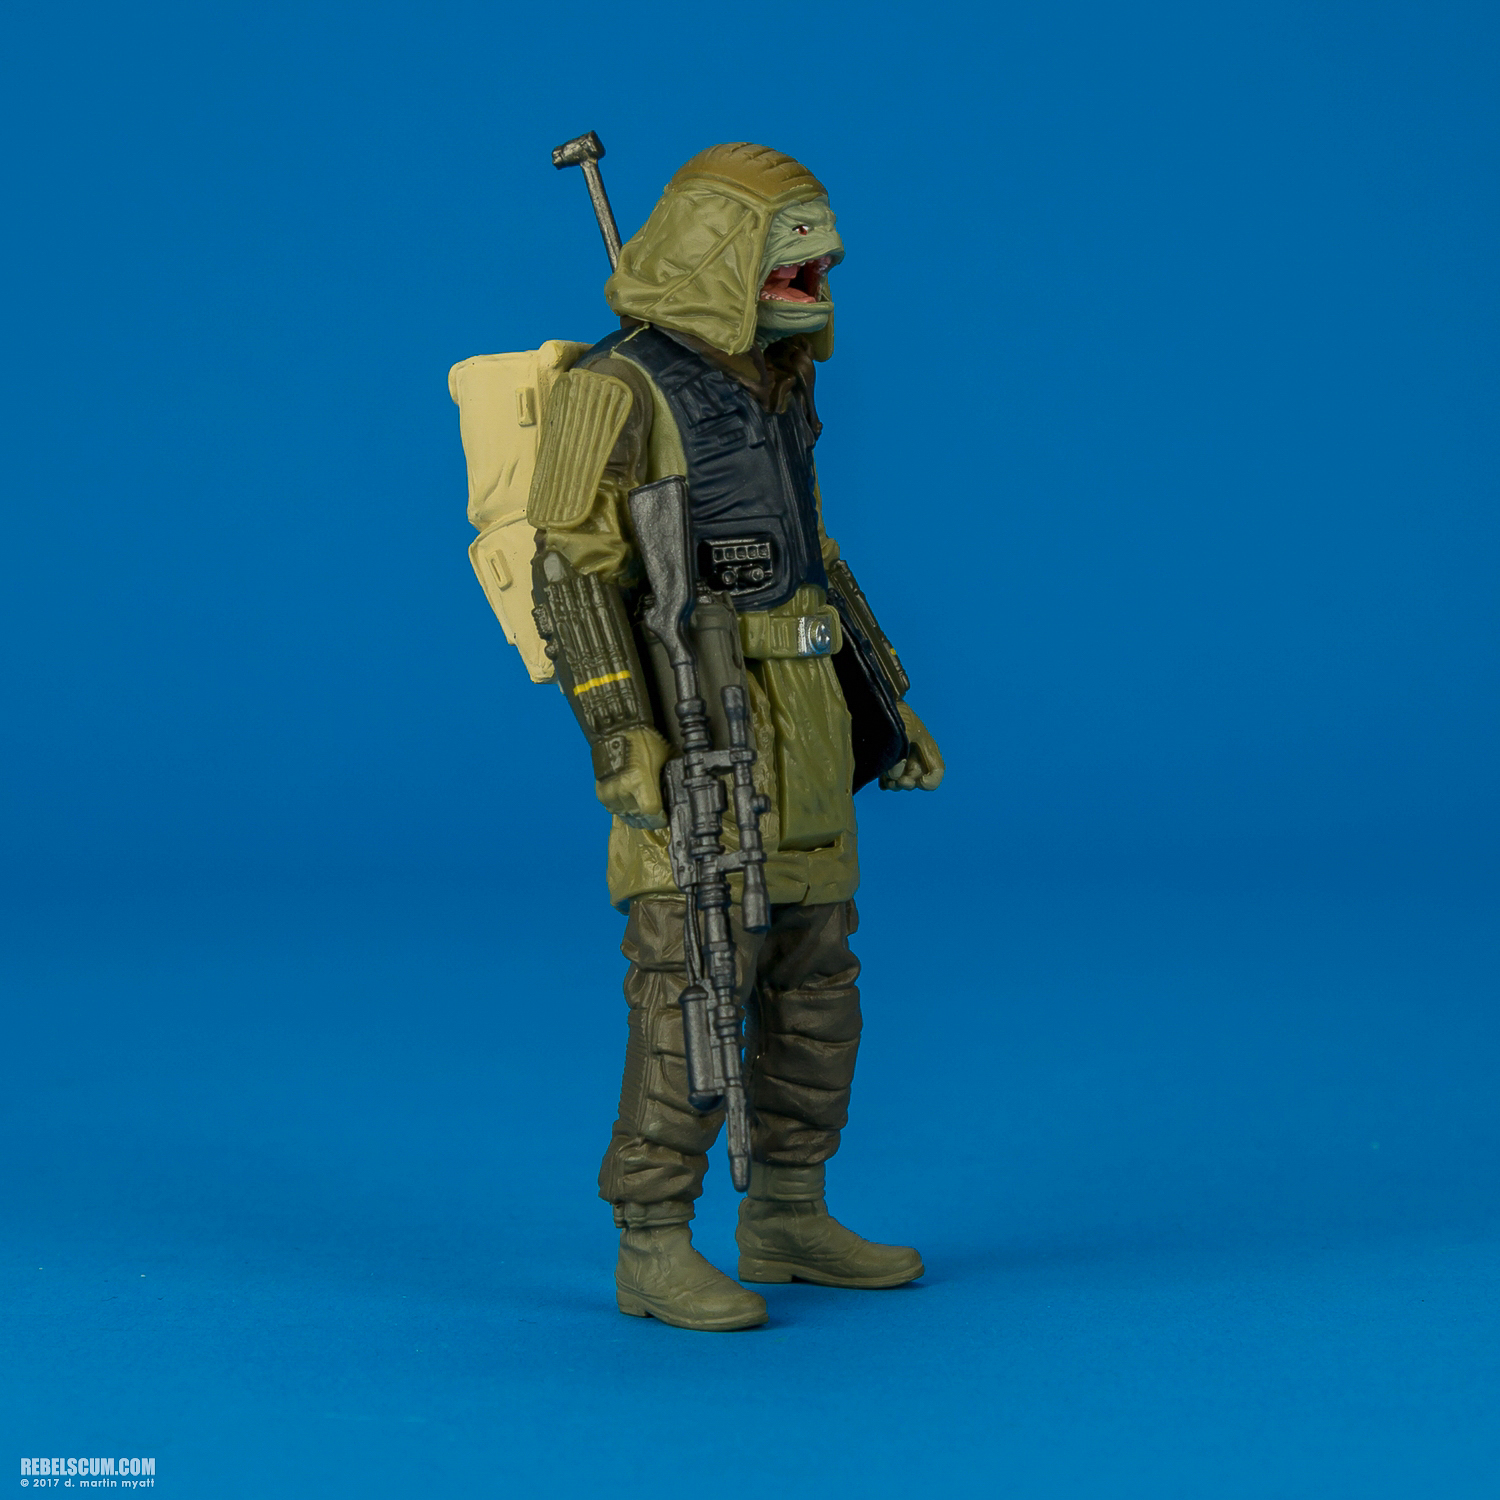 Kohls-Exclusive-Four-Pack-Rogue-One-B9605-025.jpg